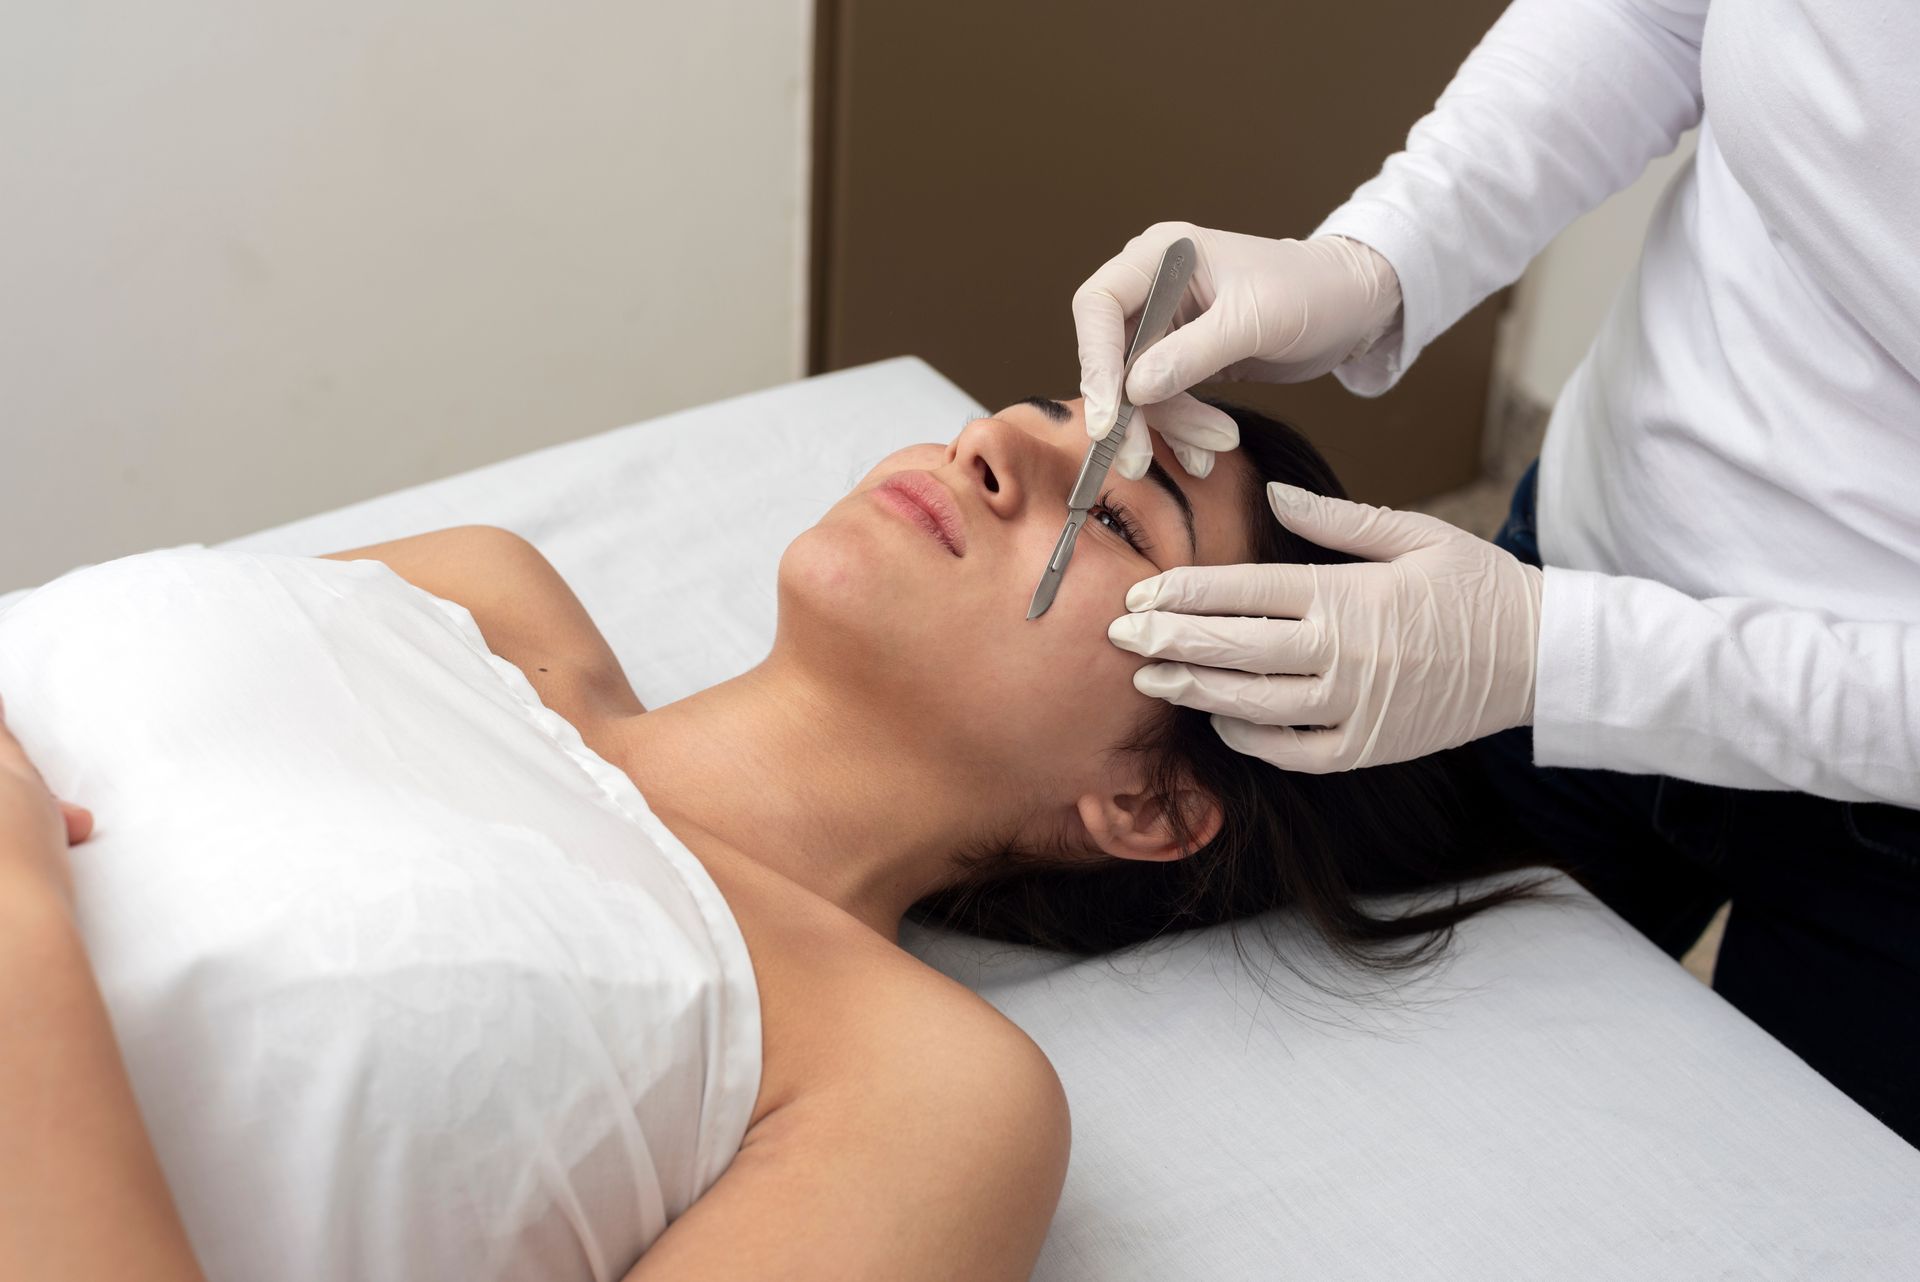 a woman is getting a facial treatment with a scalpel